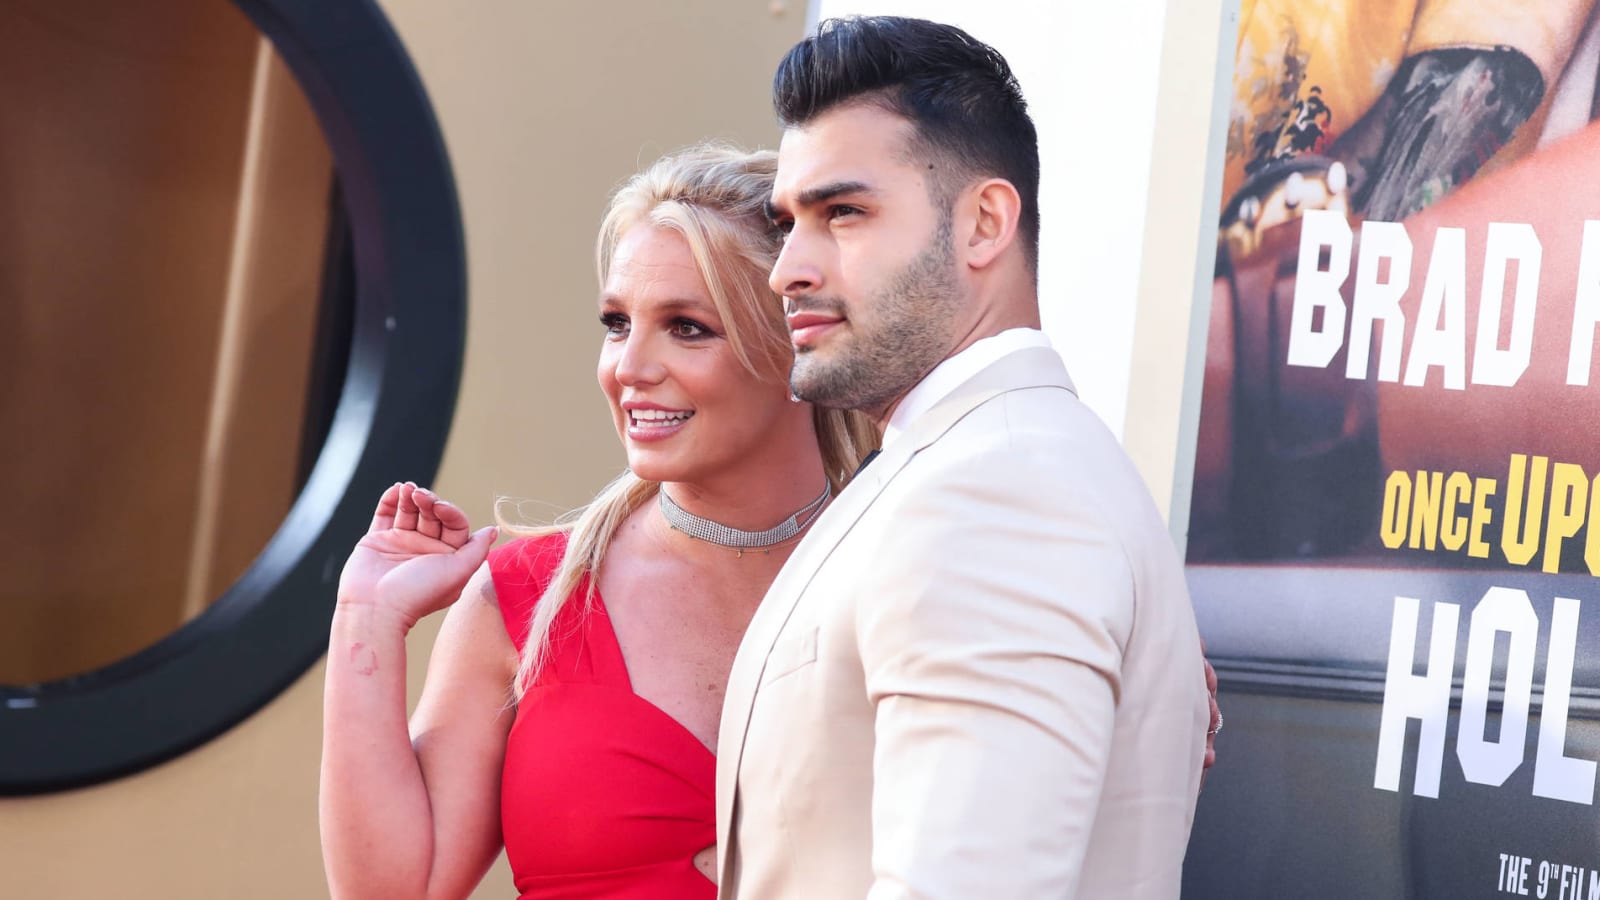 Sam Asghari jokes about 'iron clad prenup' after announcing engagement to Britney Spears